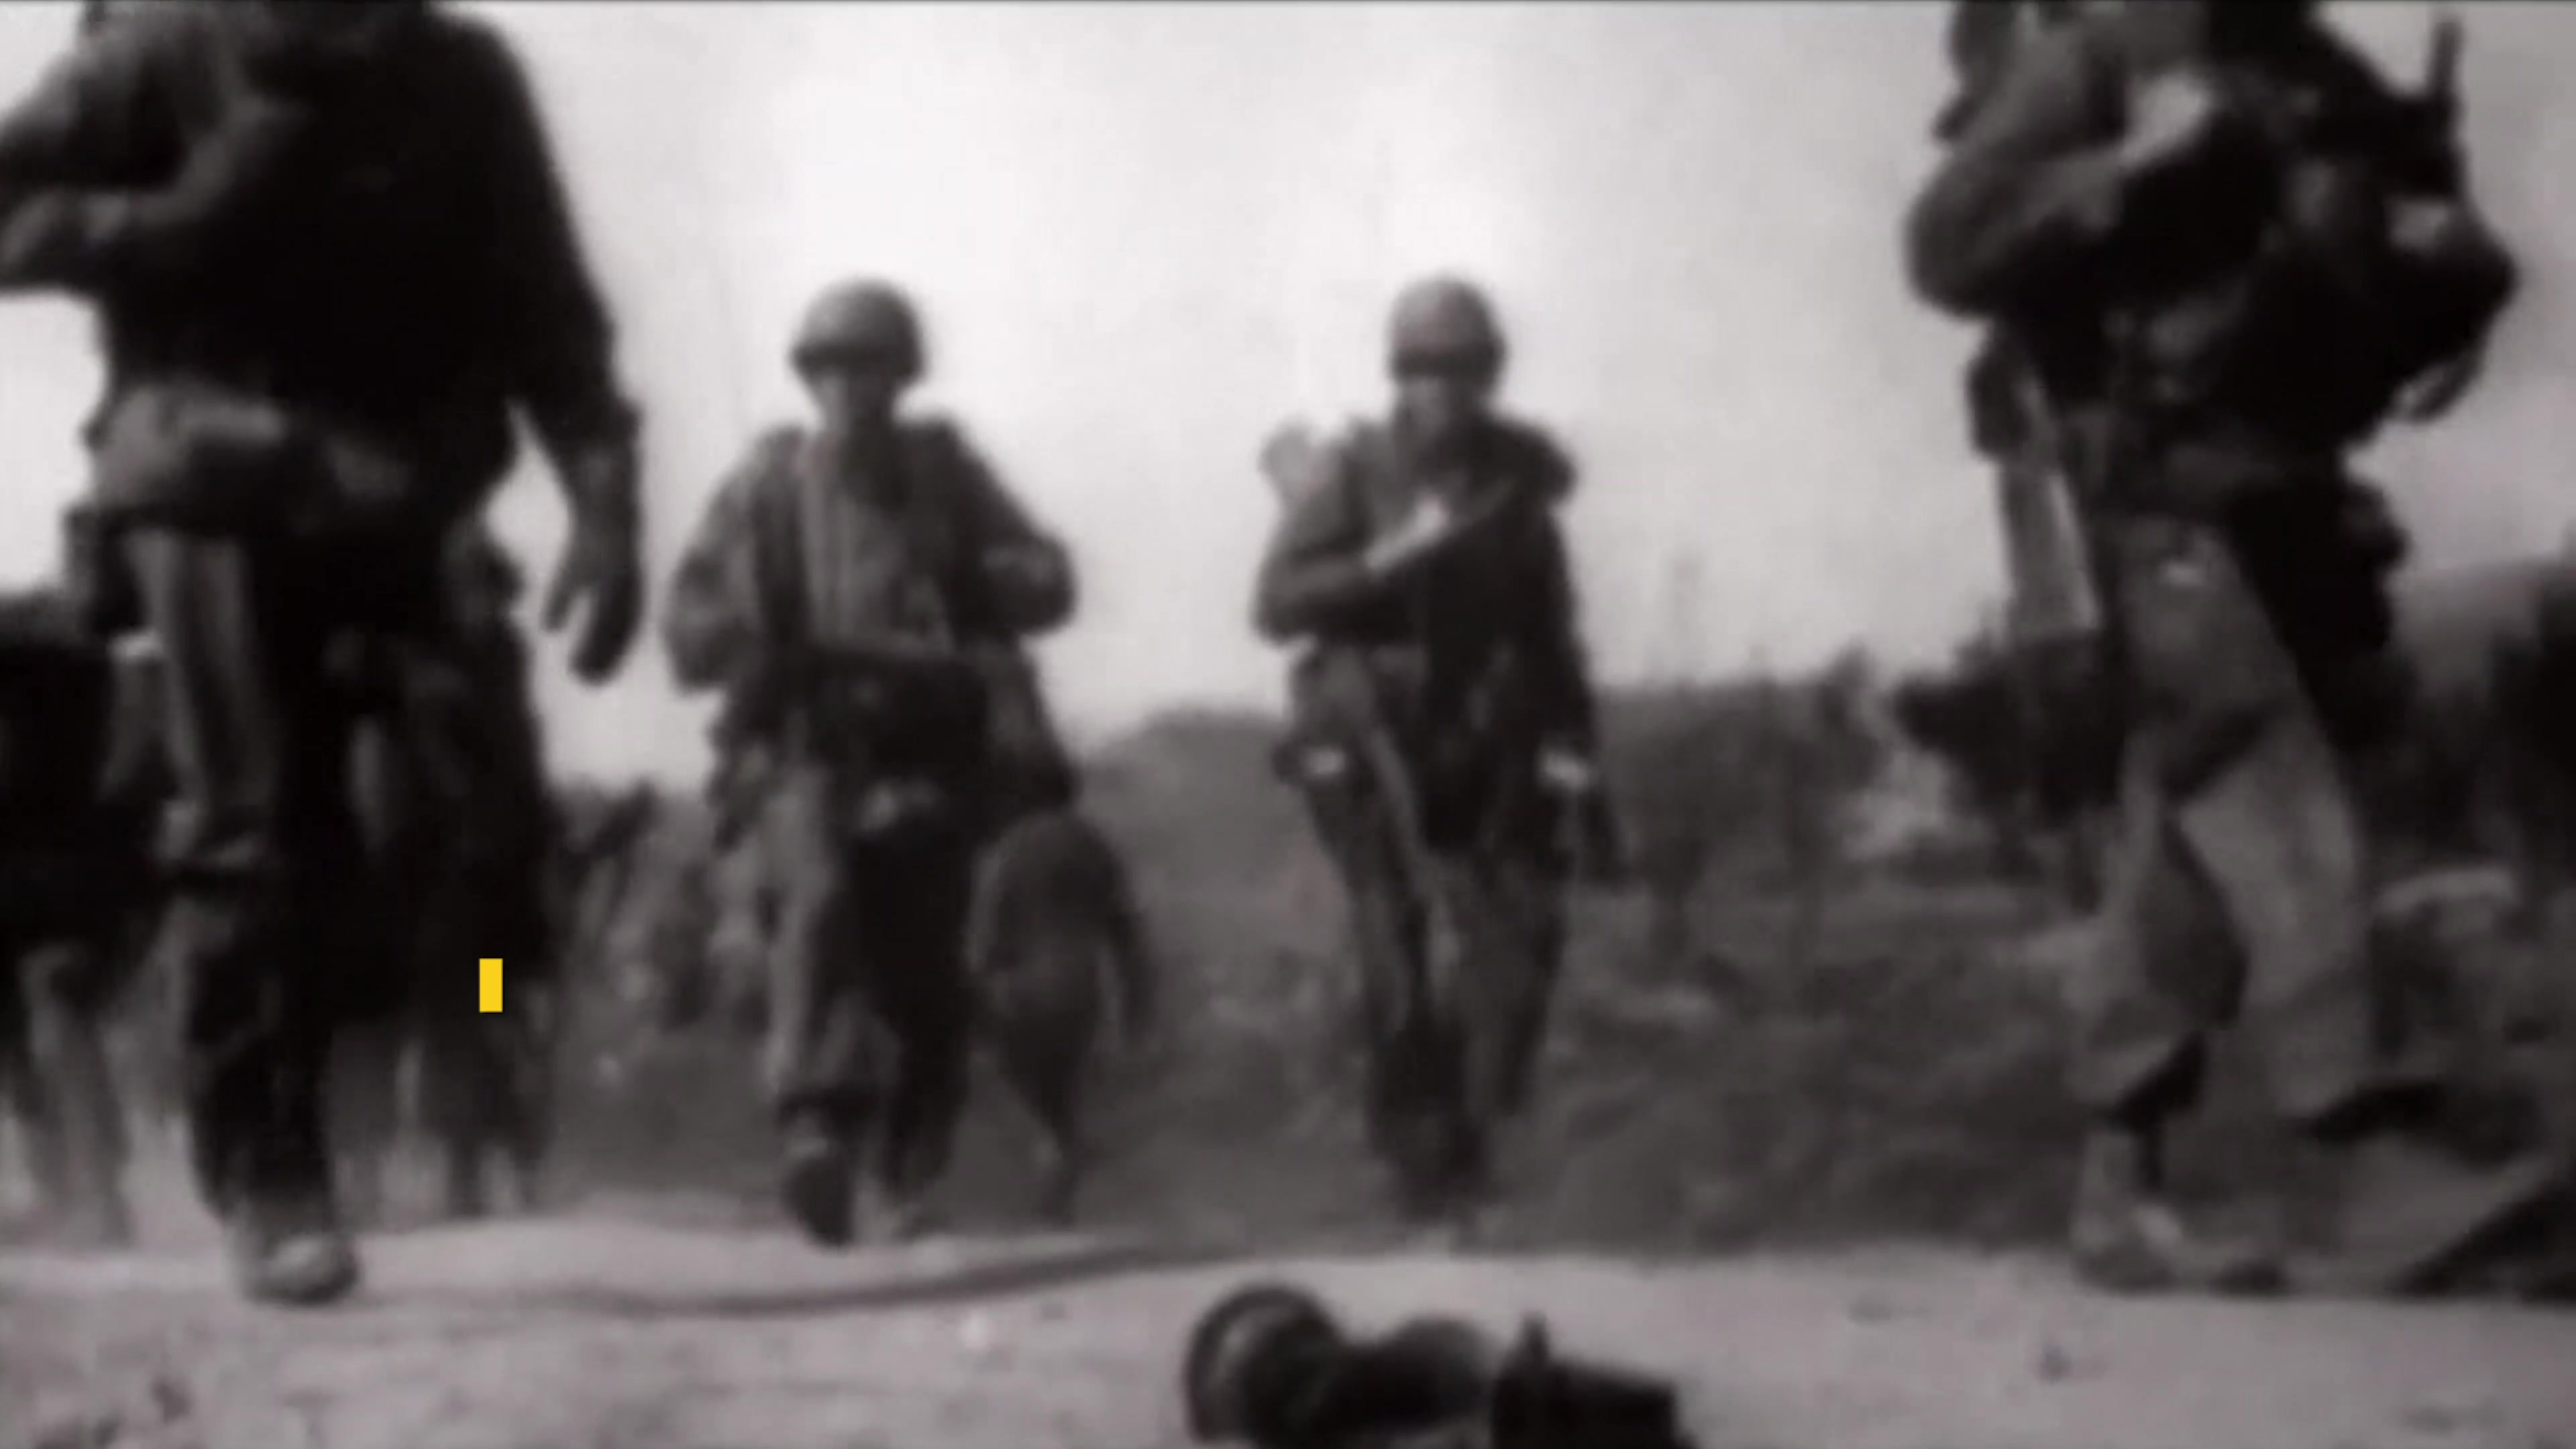 Troops walk on a dirt path in black-and-white video footage.